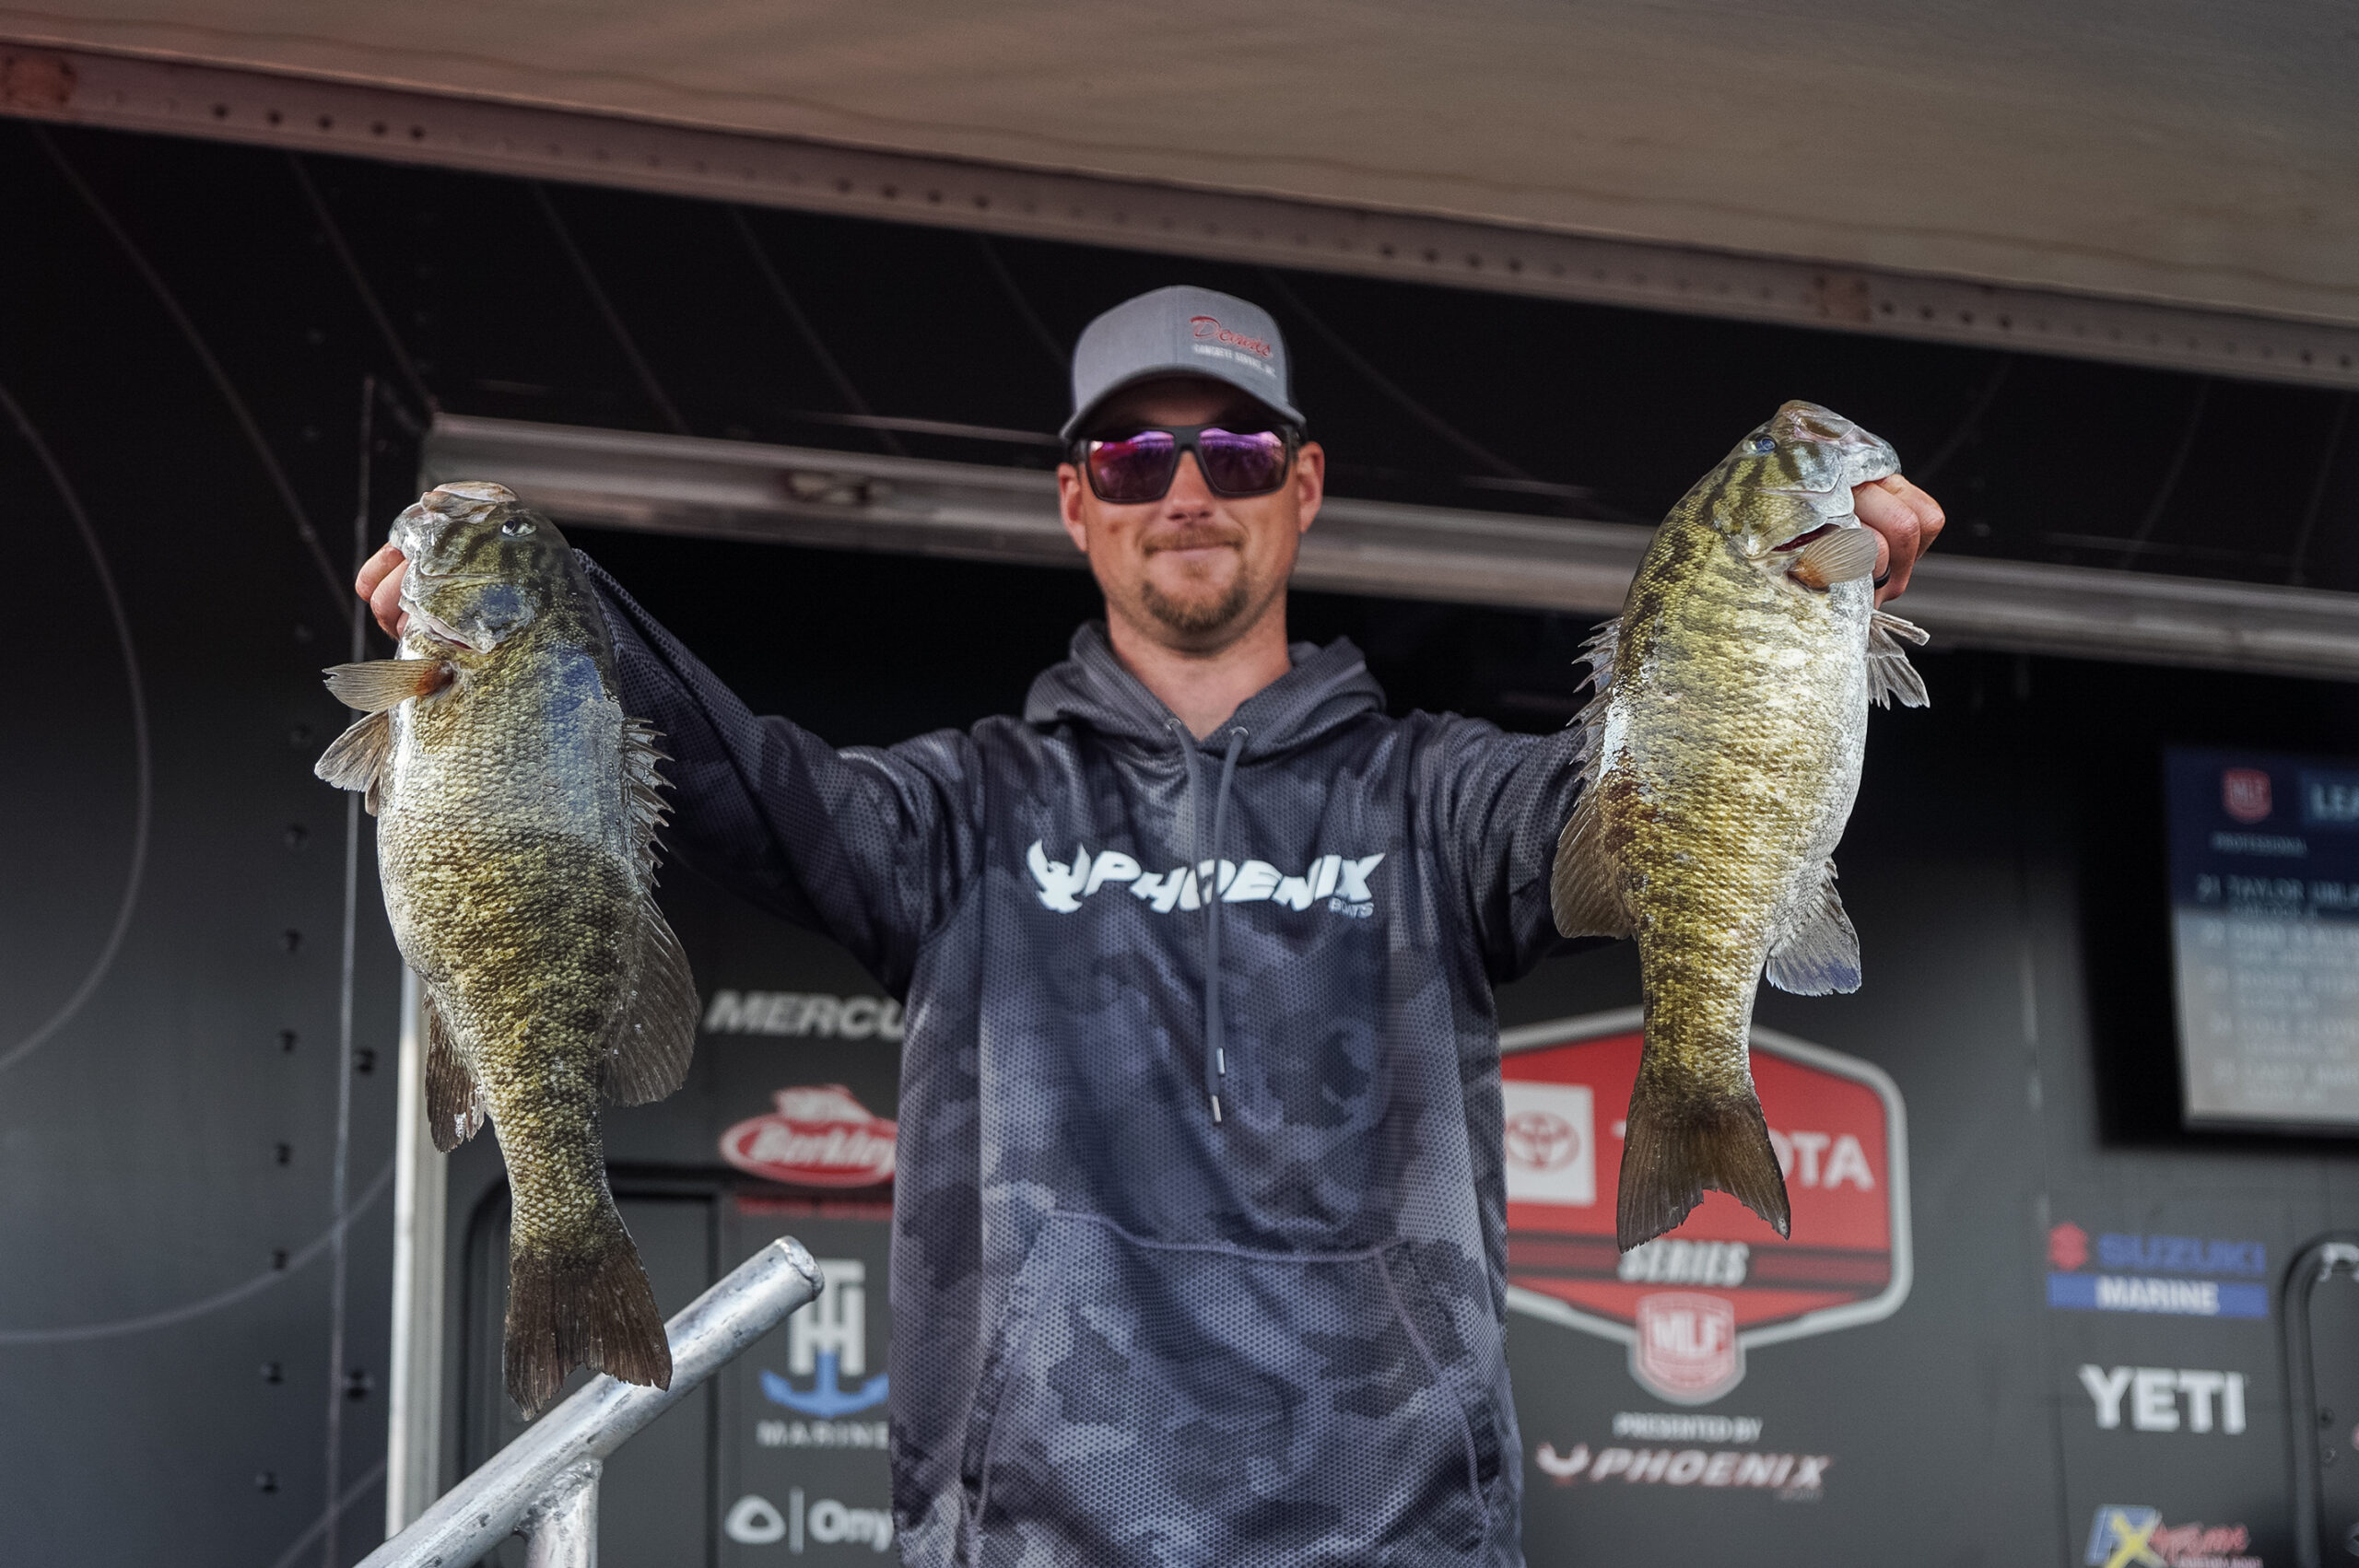 Lawrence goes wire-to-wire again on Kentucky Lake - Major League Fishing